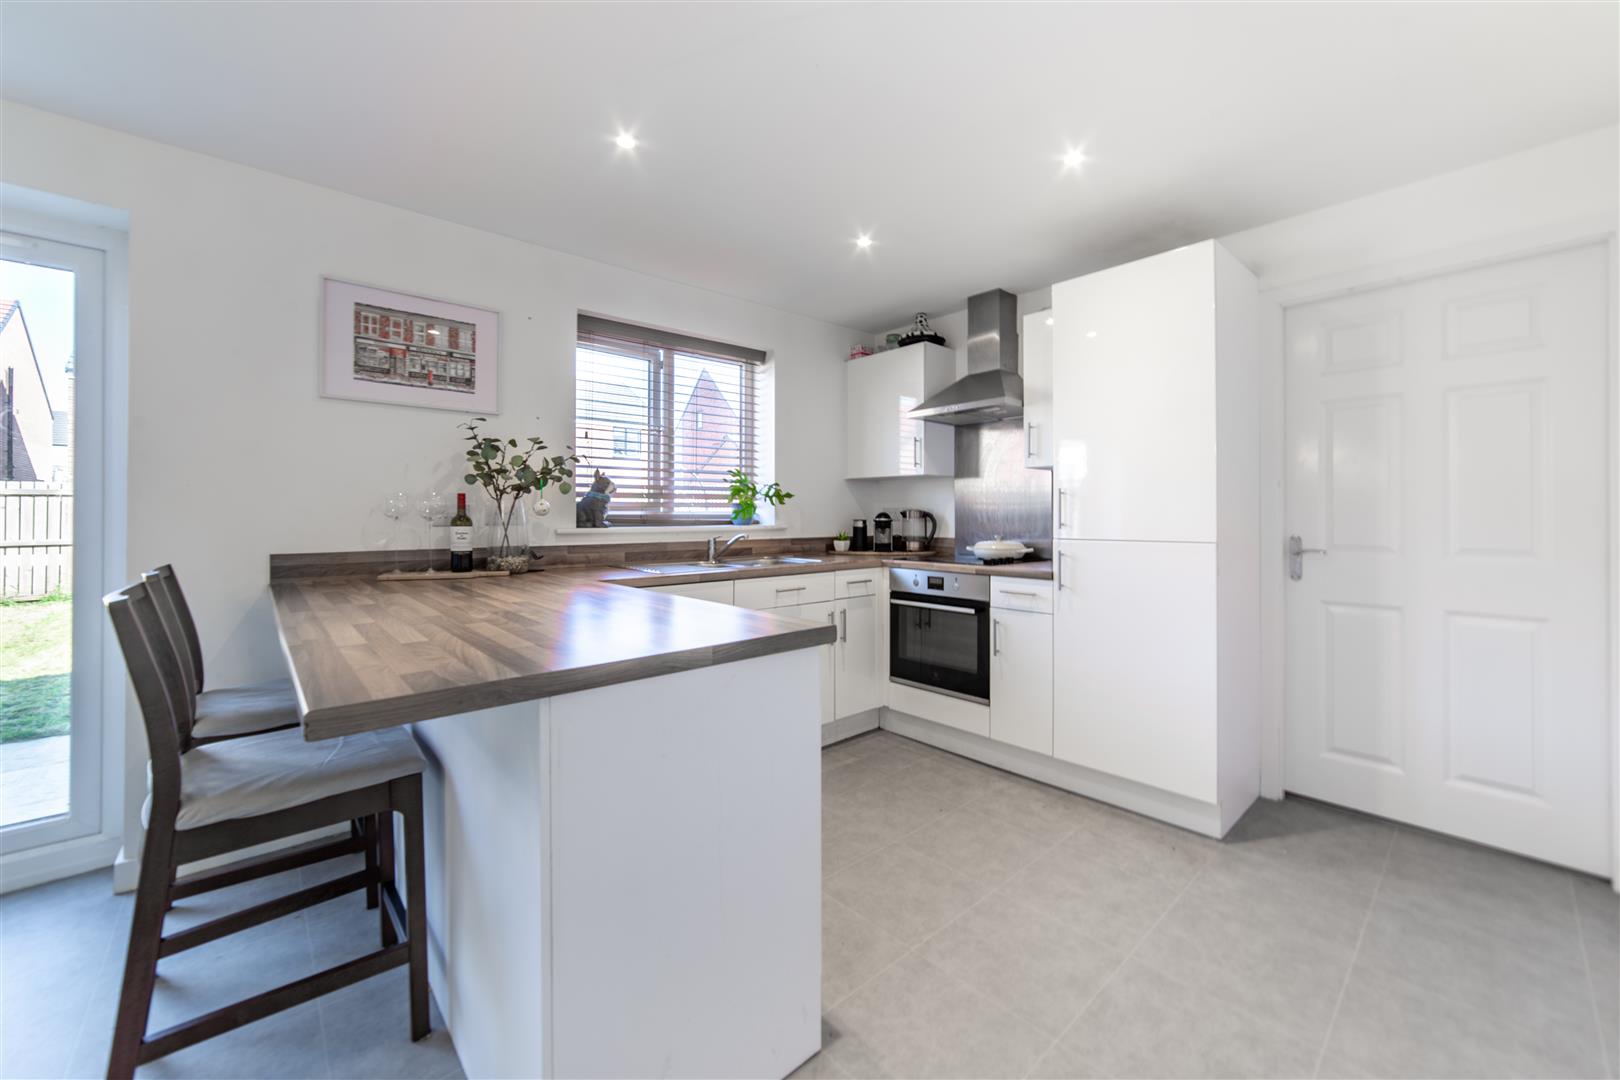 4 bed detached house for sale in Speckledwood Way, Great Park 1